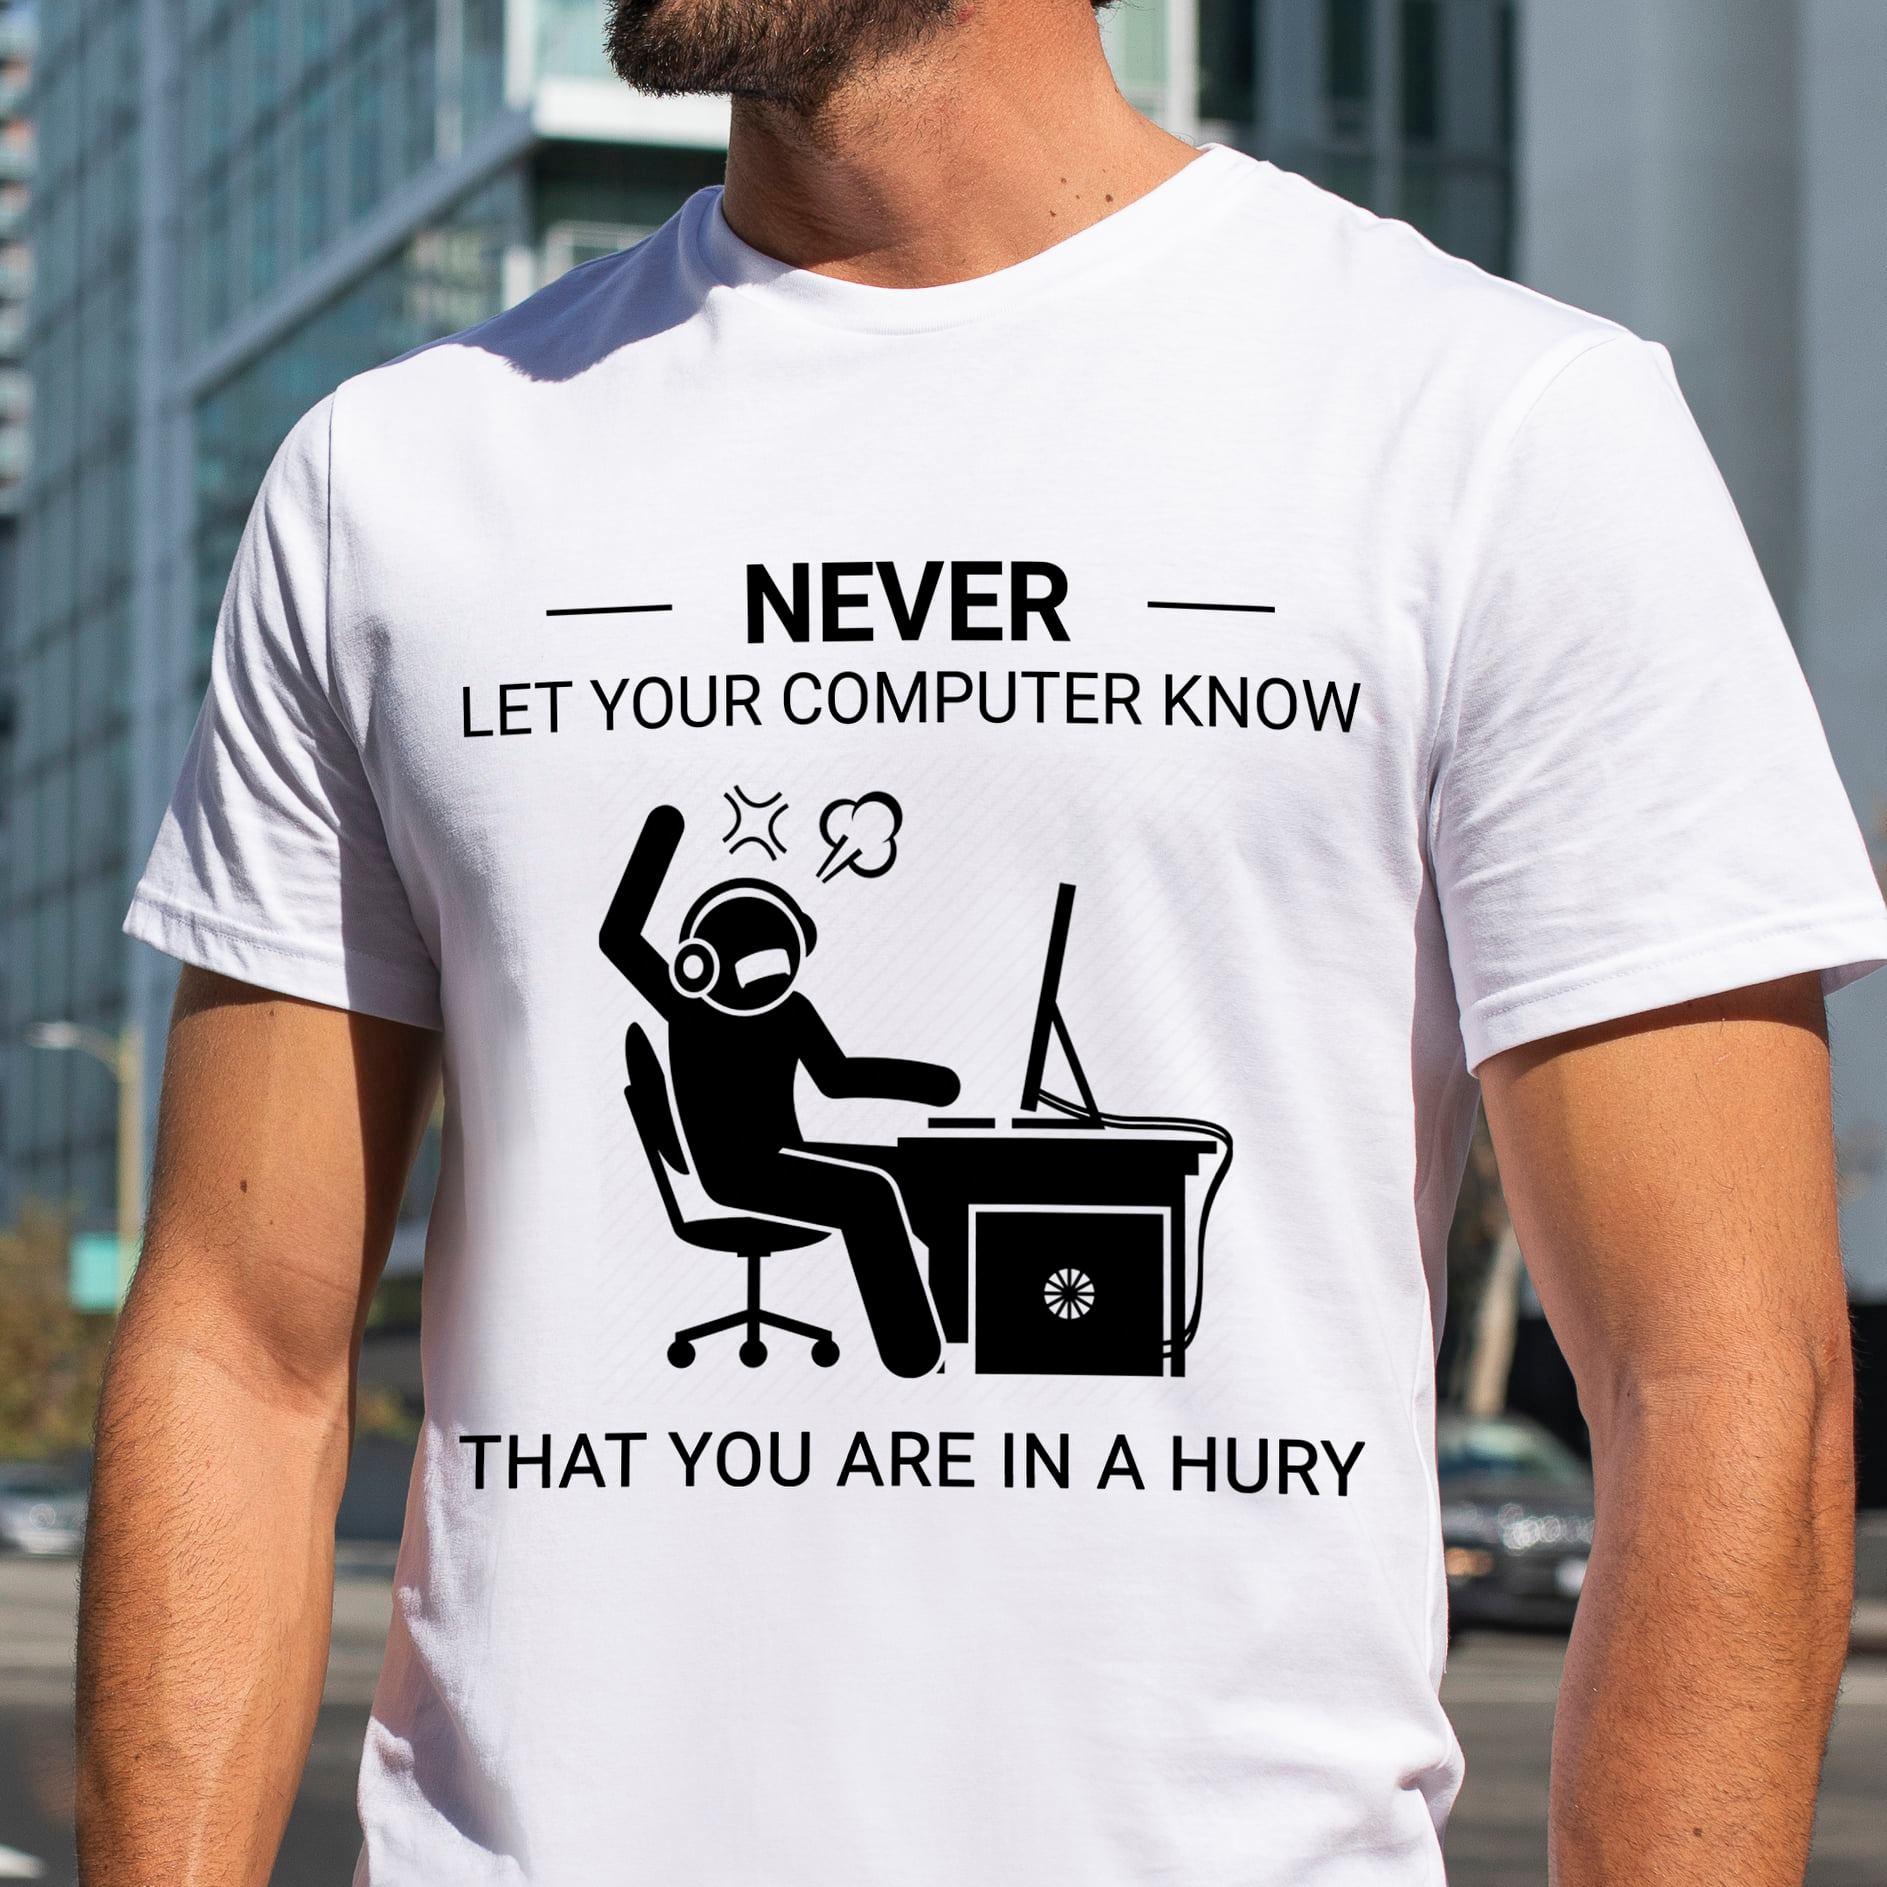 Nevet let your computer know that you are in a hury - Angry user, man using computer